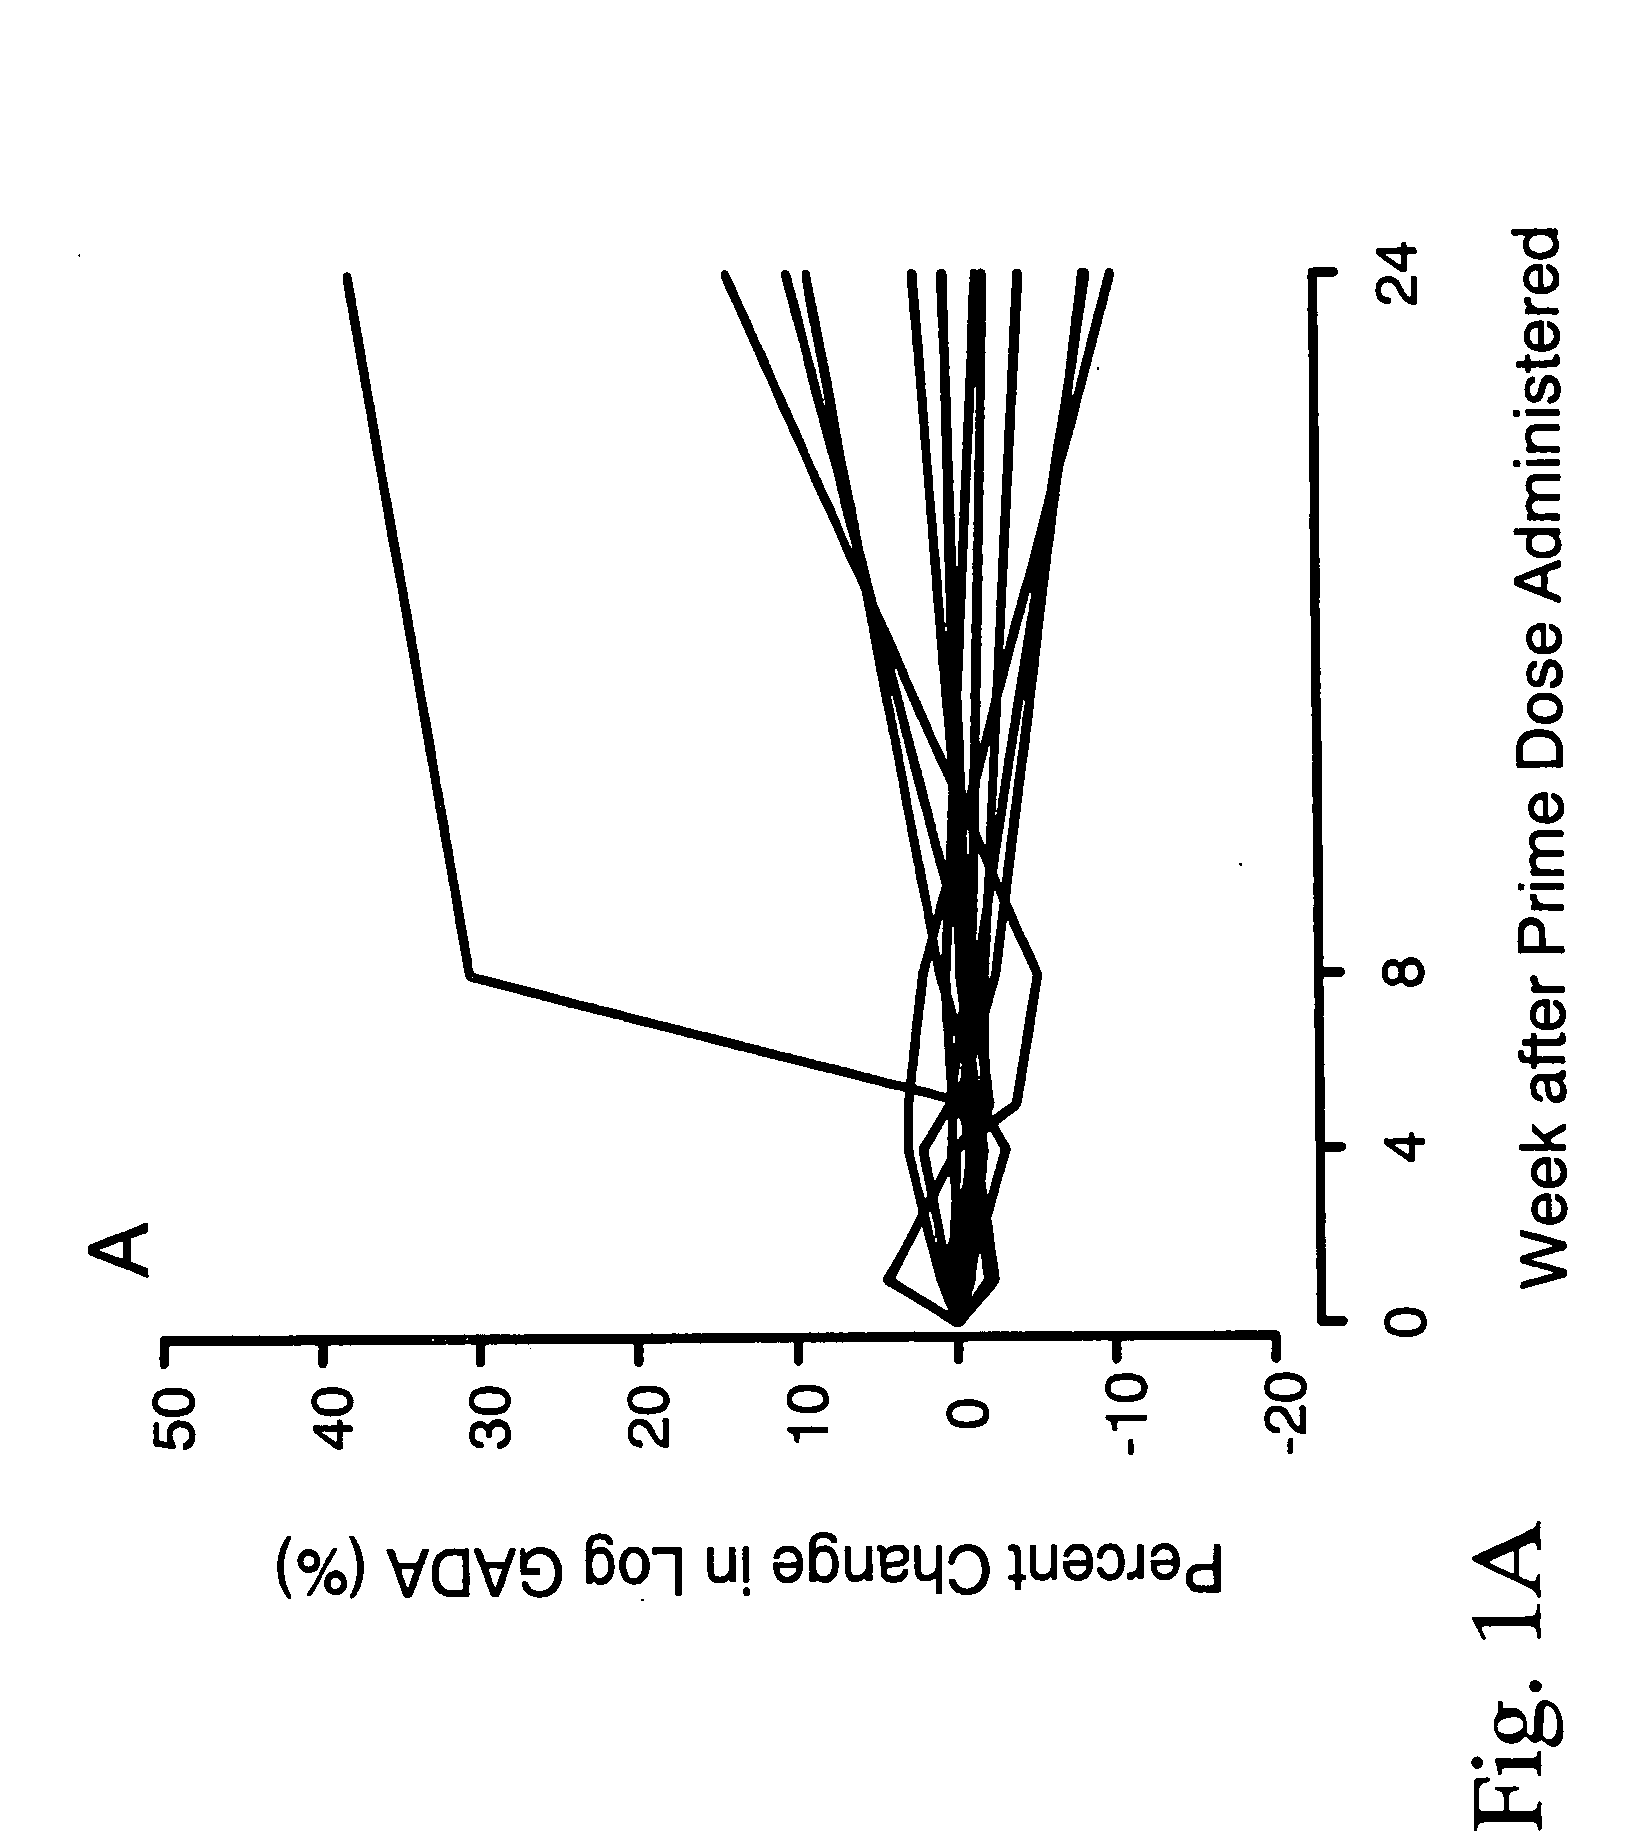 Immunomodulation by a therapeutic medication intended for treatment of diabetes and prevention of autoimmune diabetes